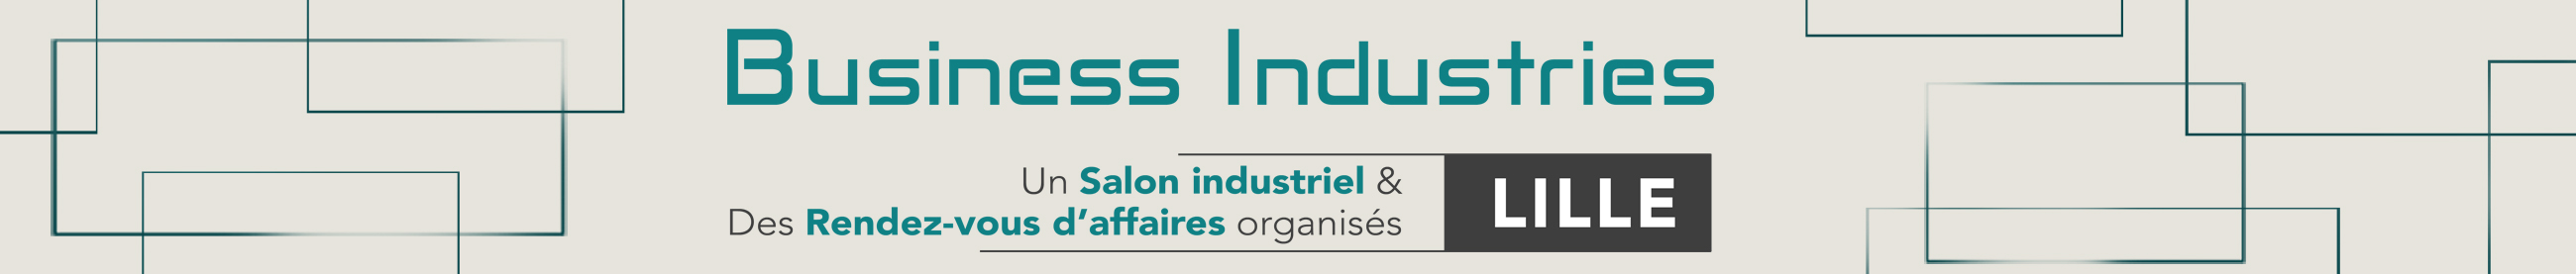 Business Industries Lille